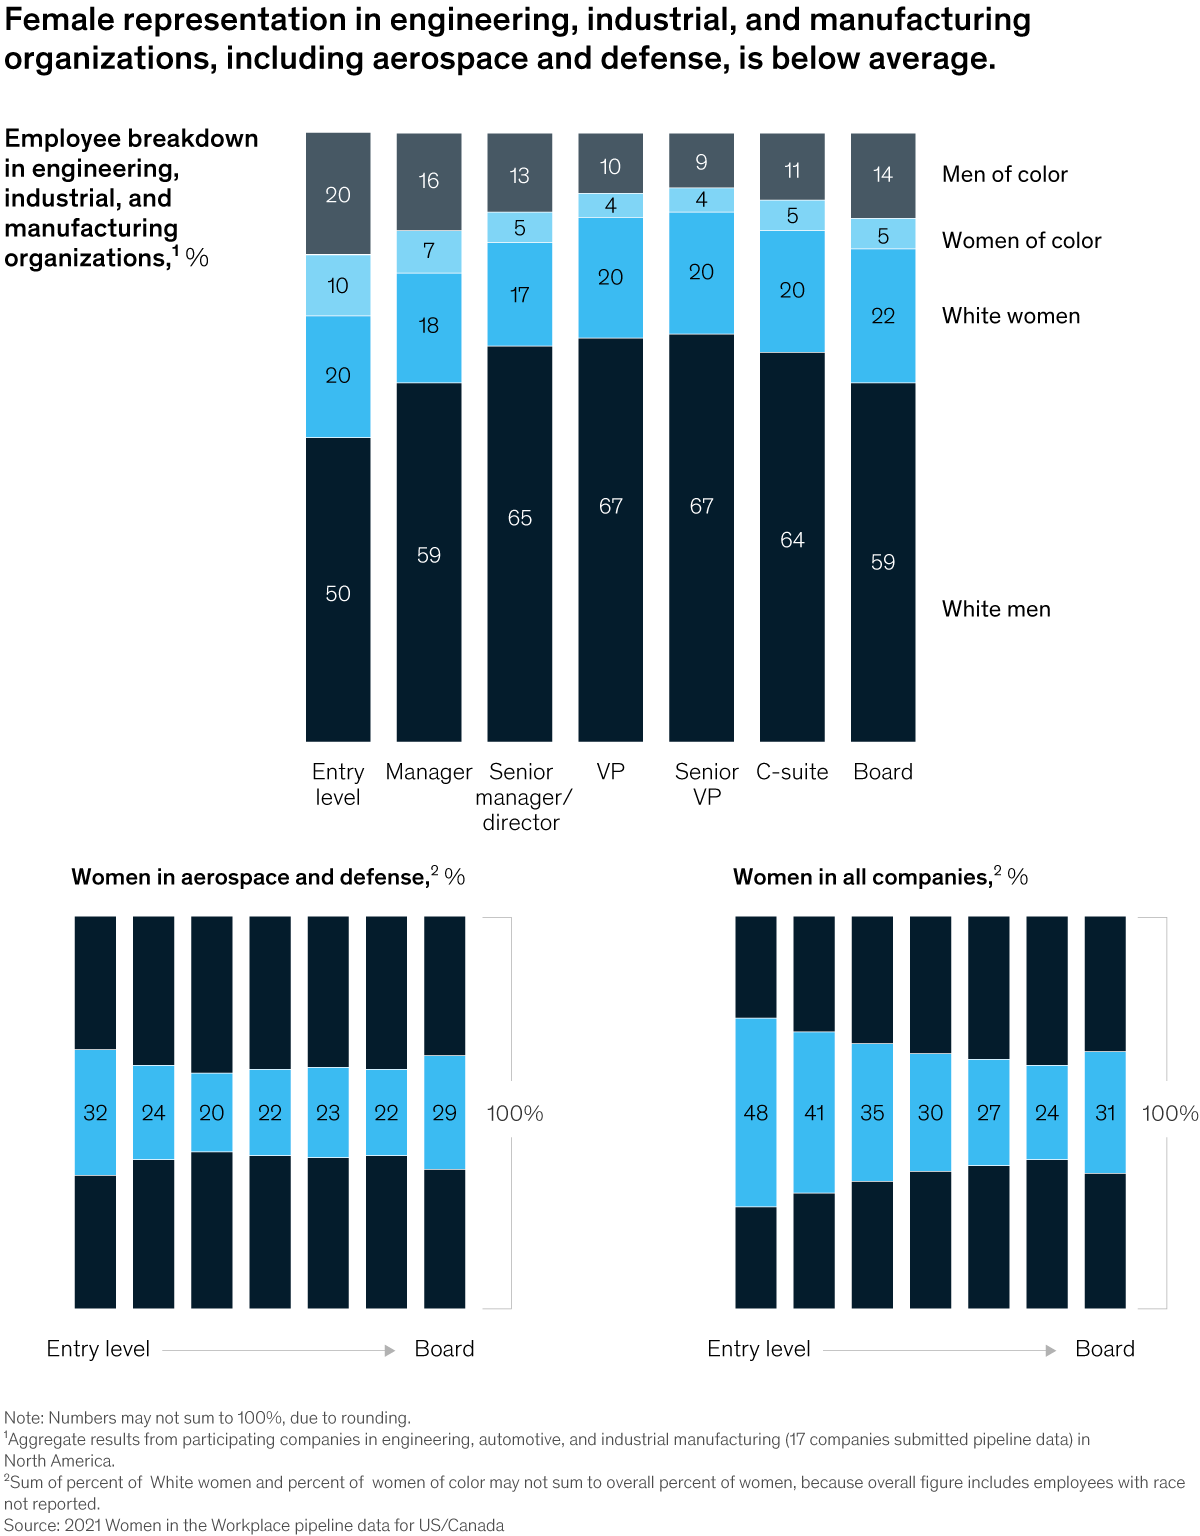 Charts of female representation in engineering, industrial, and manufacturing organizations